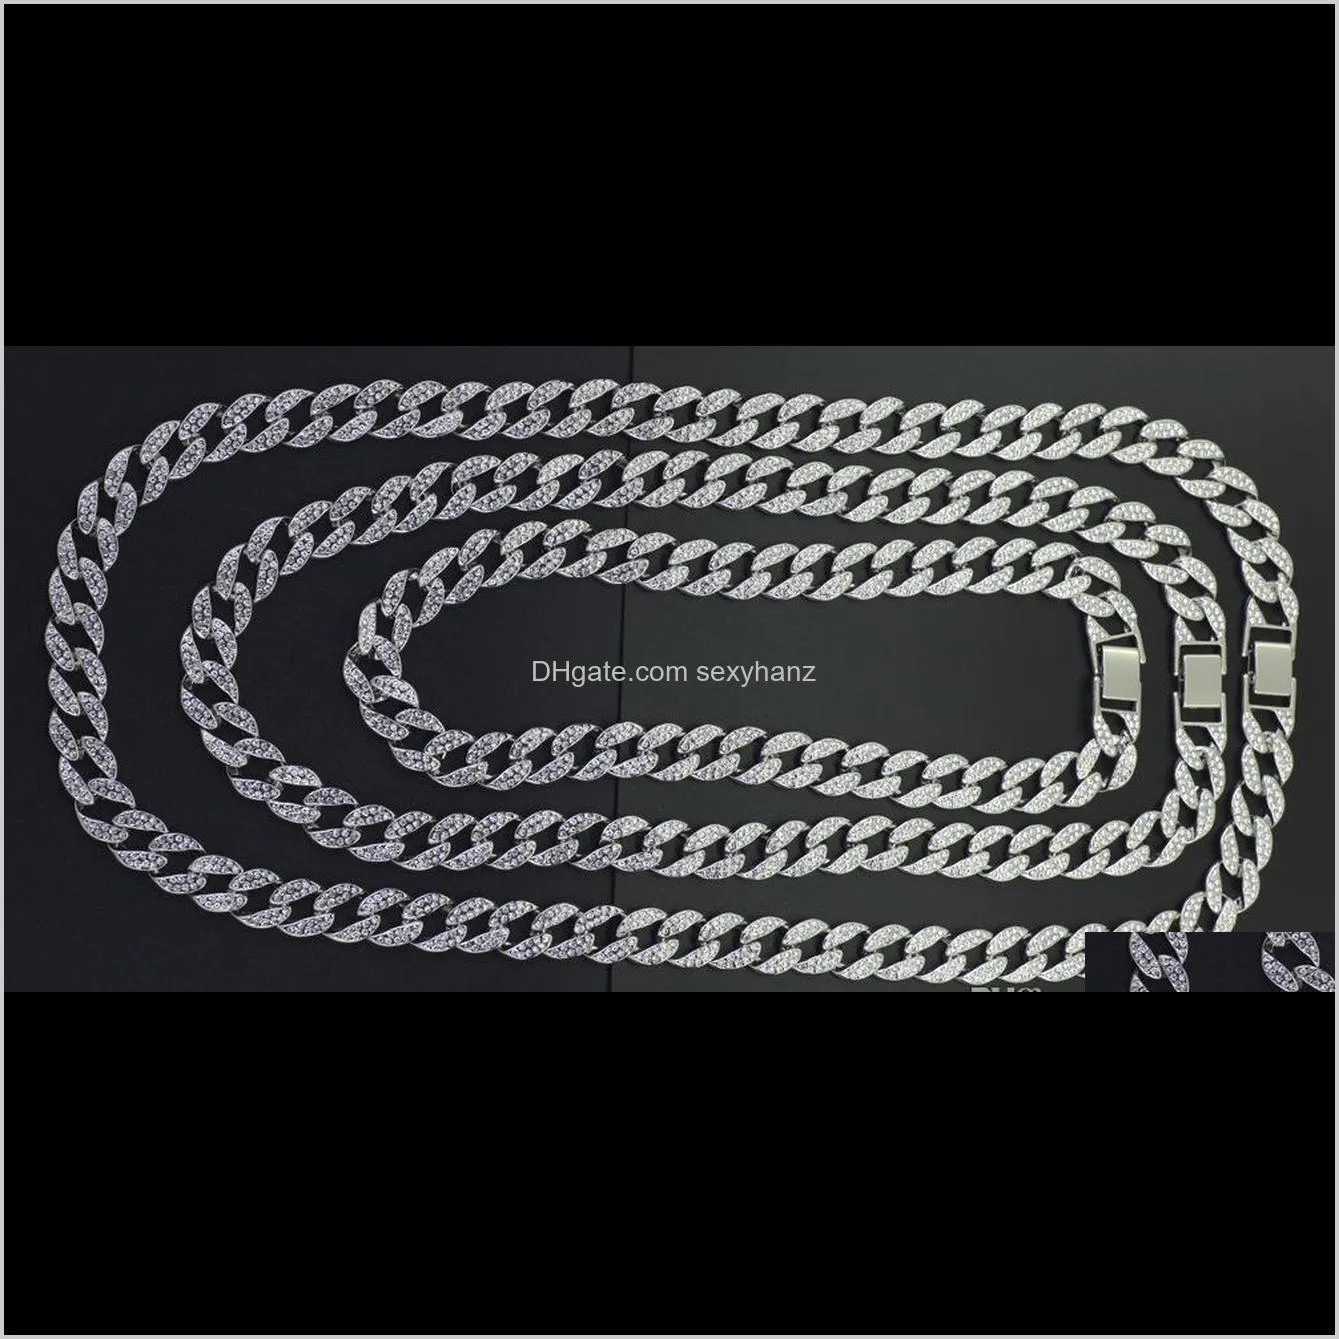 hip hop iced out cuban chain cuban link chain necklace bling bling jewelry 16inch 18inch 20inch 24inch 30 inch